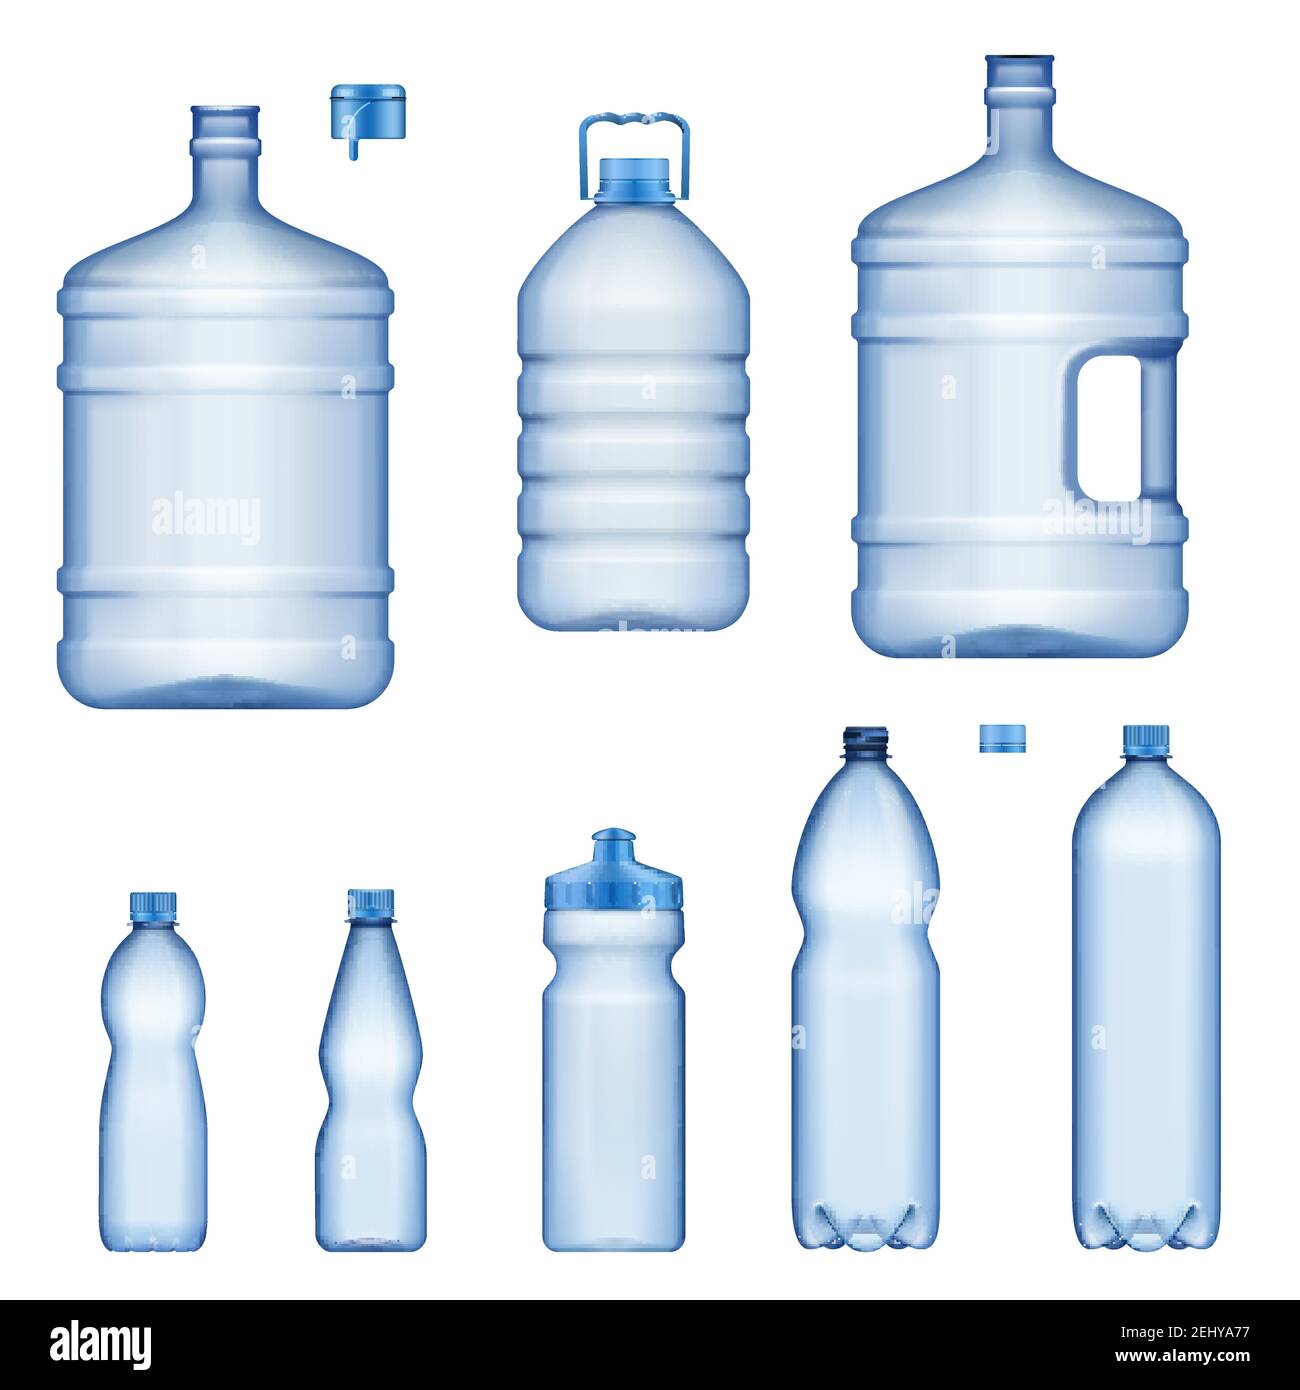 https://c8.alamy.com/comp/2EHYA77/plastic-water-bottles-realistic-3d-mockup-model-set-vector-isolated-transparent-liquid-containers-sport-drink-juice-or-mineral-drinking-water-bott-2EHYA77.jpg